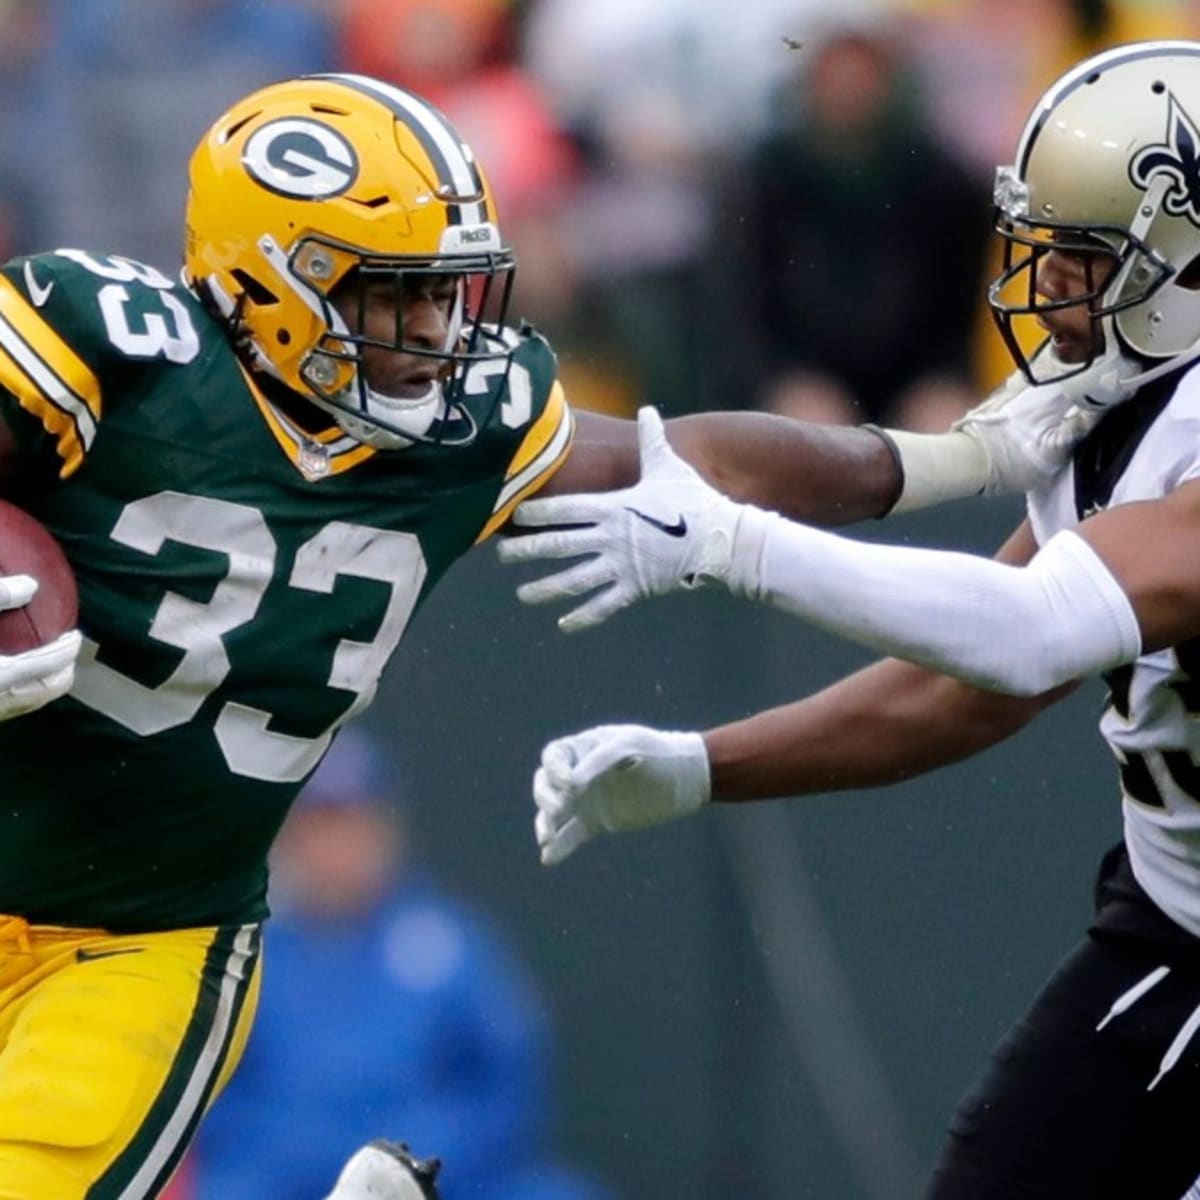 What time is the New Orleans Saints vs. Green Bay Packers game